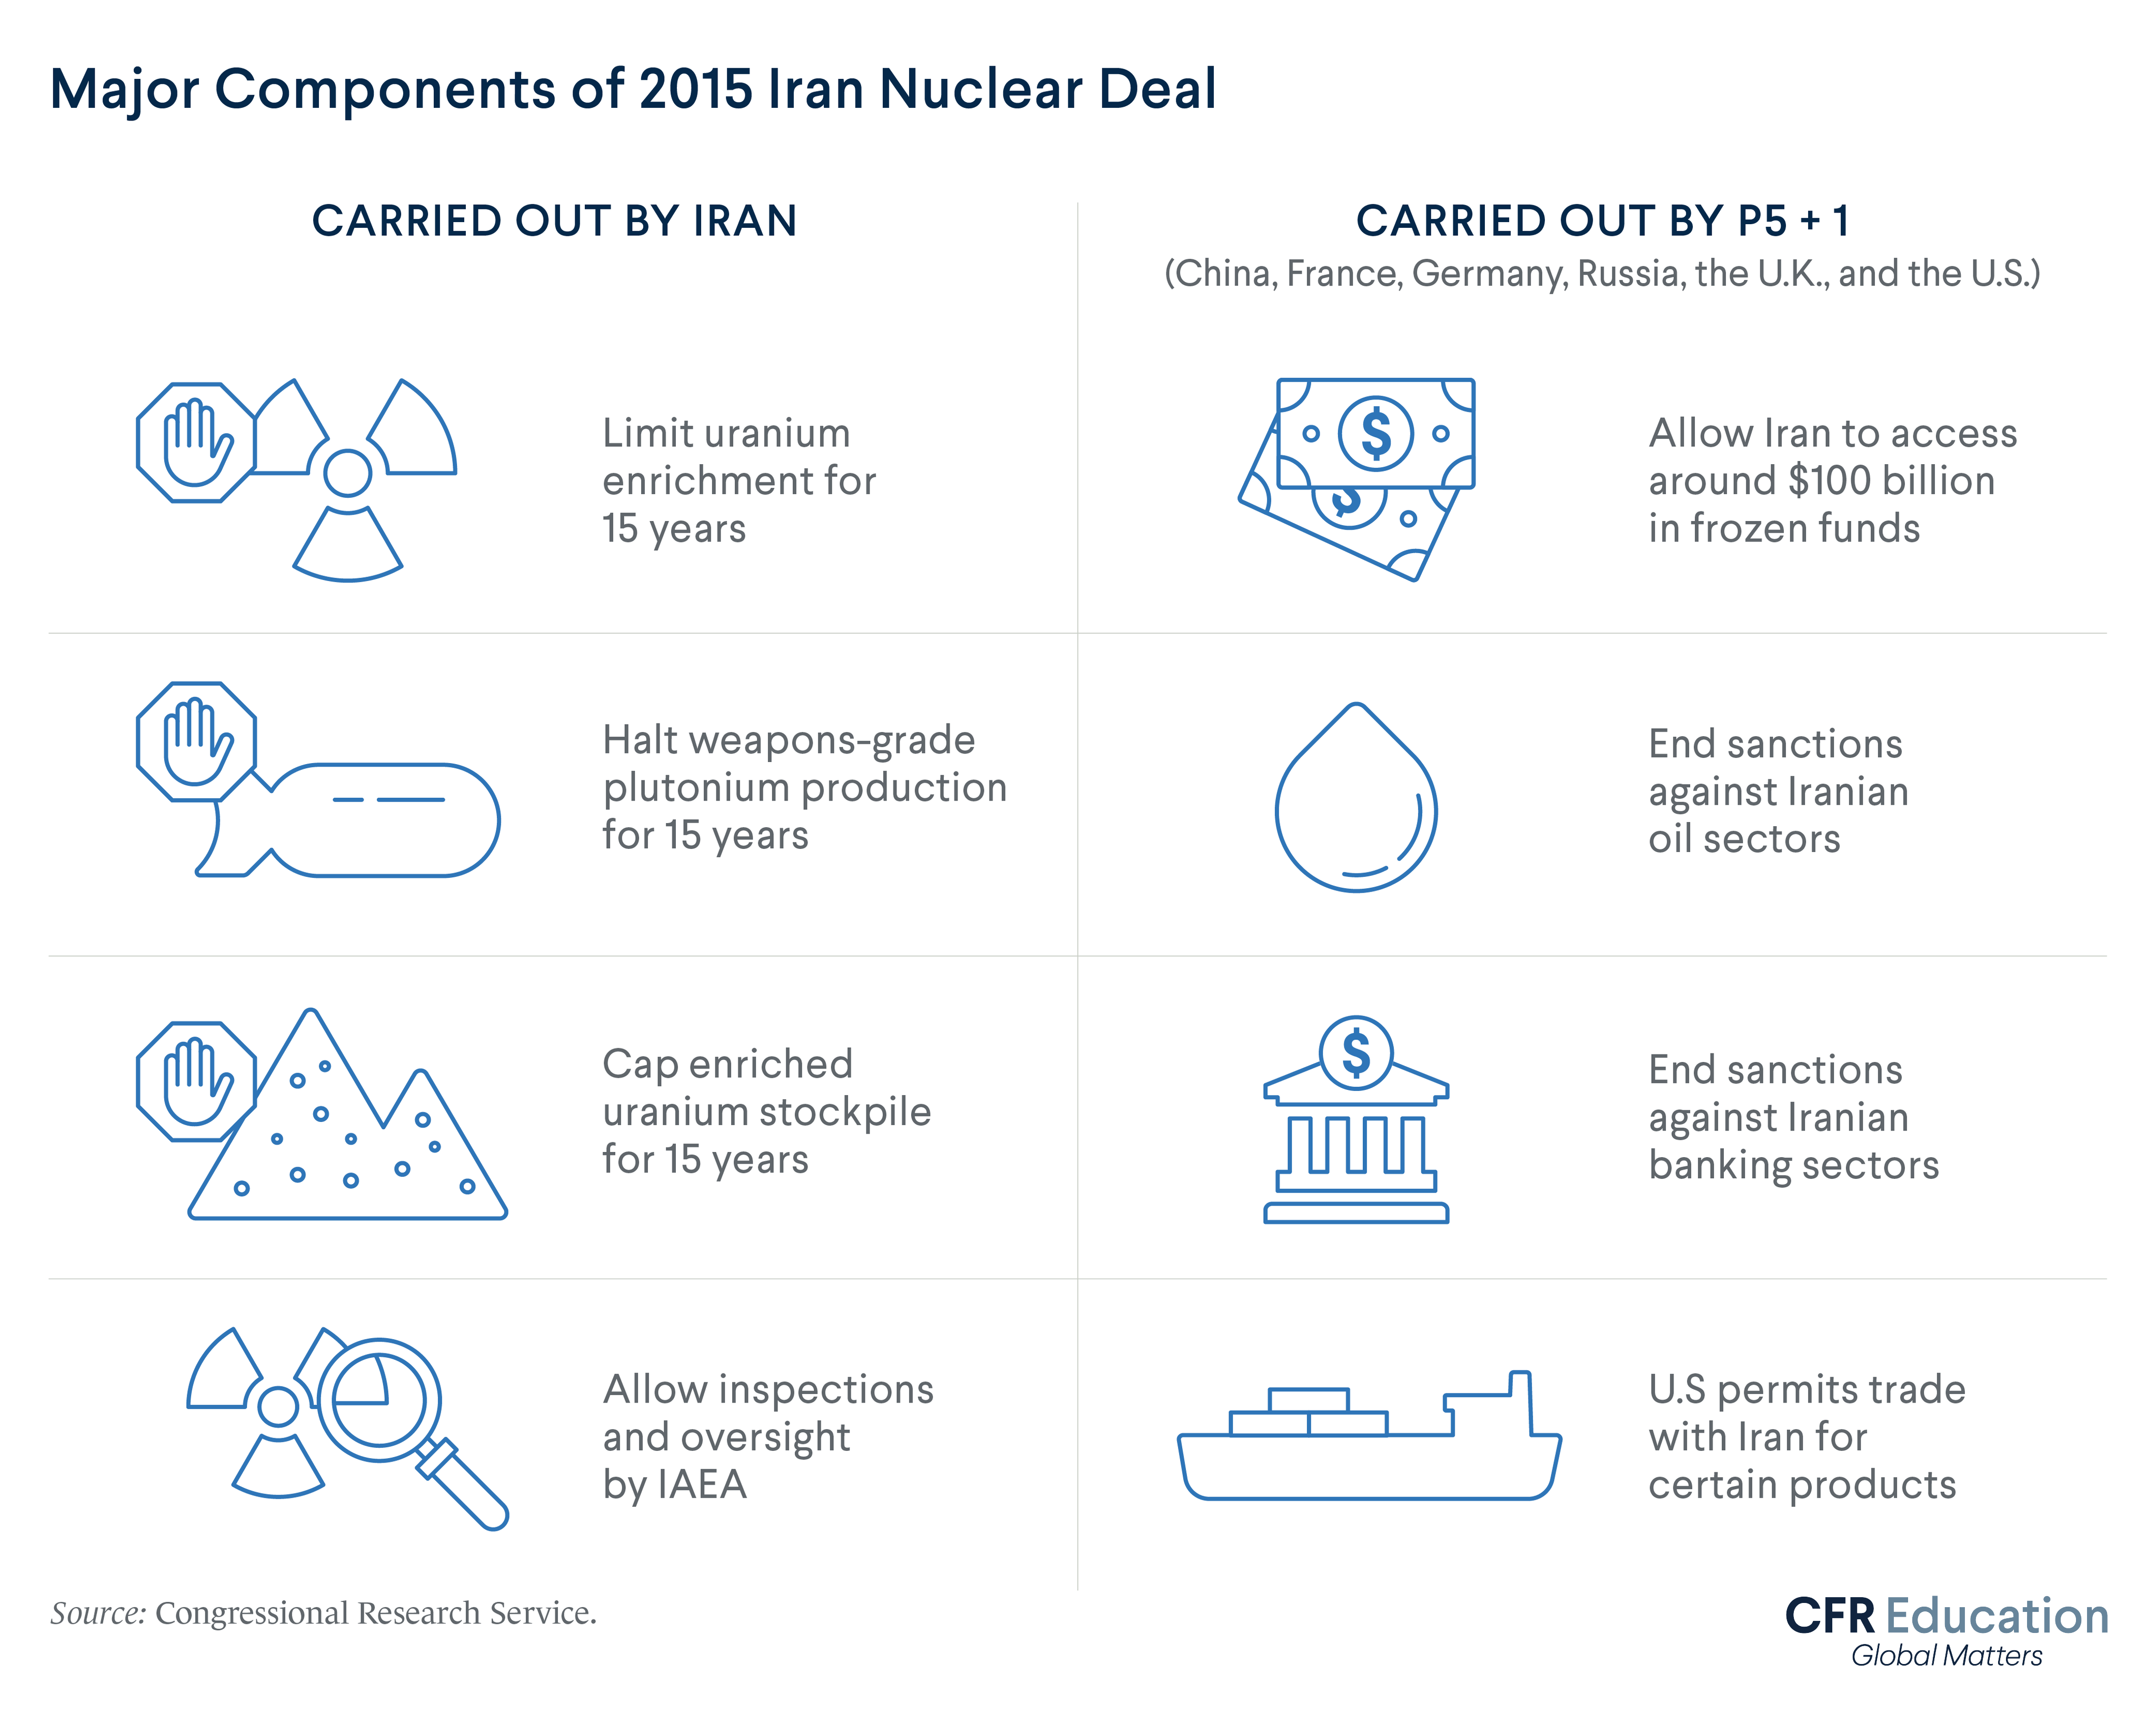 Infographic illustrating the major components of the 2015 Iran nuclear deal. The deal lifted international sanctions in exchange for a fifteen-year limit on Iran’s nuclear program. For more info contact us at cfr_education@cfr.org.